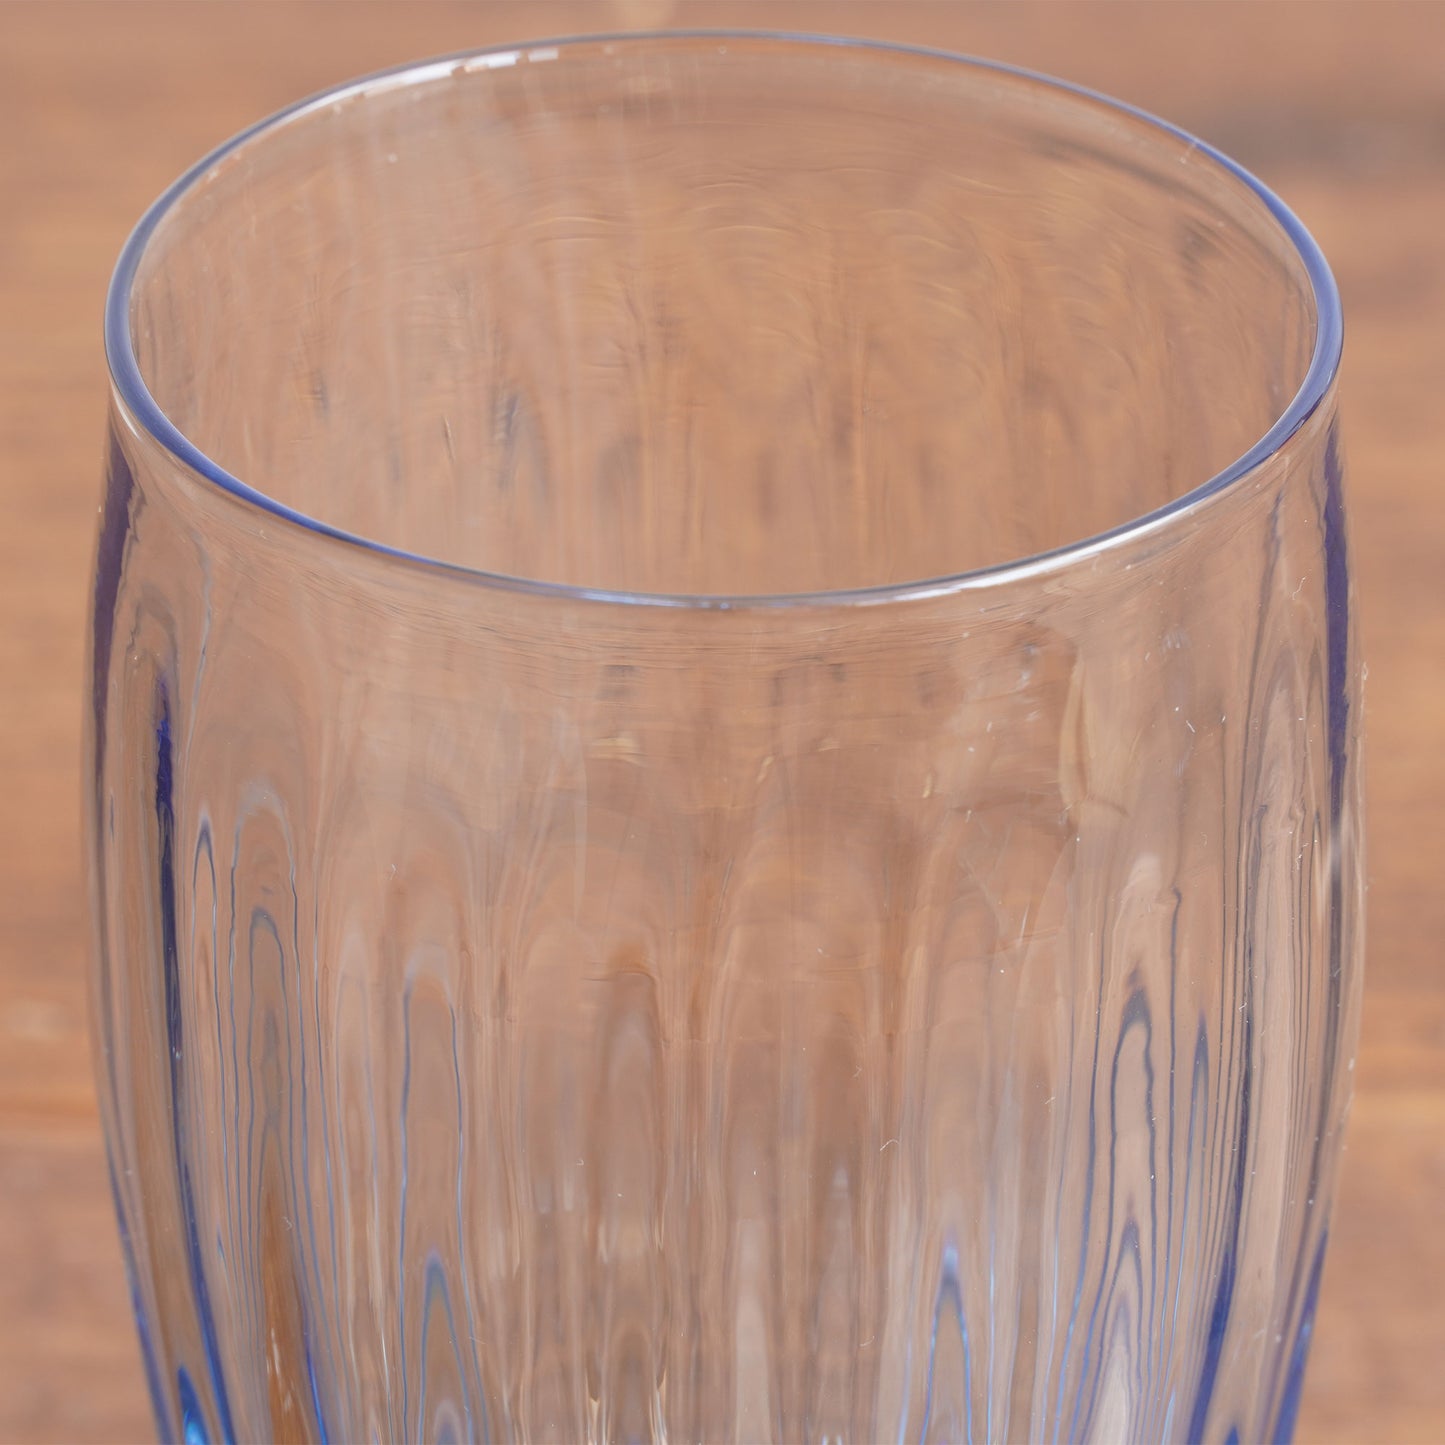 Hiroy Glass Studio Everyday Glass Cup Grice Series